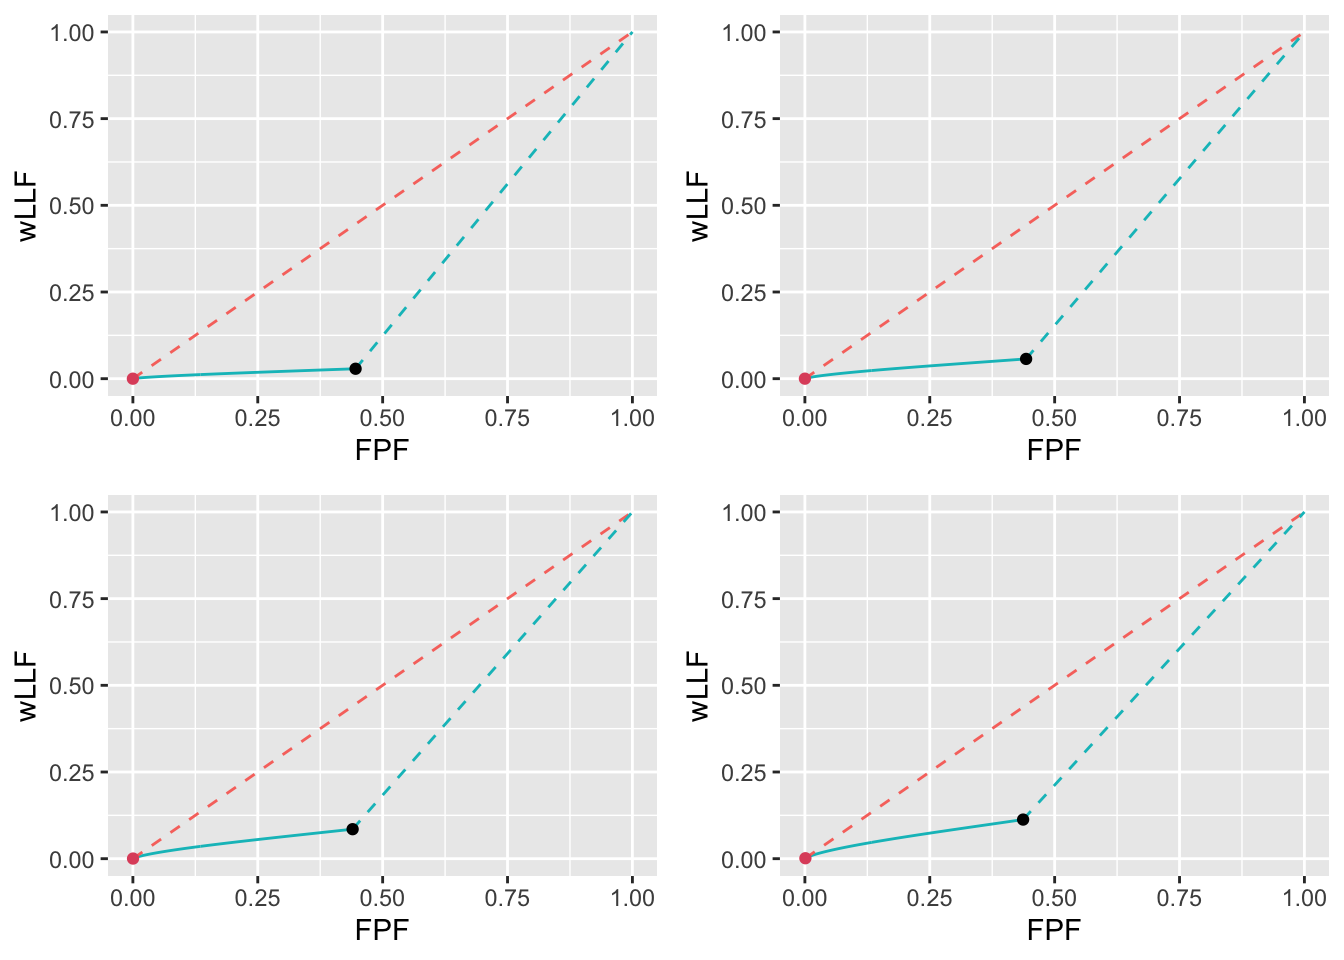 Low performance varying $\nu$ wAFROC plots for the two optimization methods with superimposed operating points. The color coding is as in previous figures. The values of $\nu$ are: top-left $\nu = 0.1$, top-right $\nu = 0.2$, bottom-left $\nu = 0.3$ and bottom-right $\nu = 0.4$.